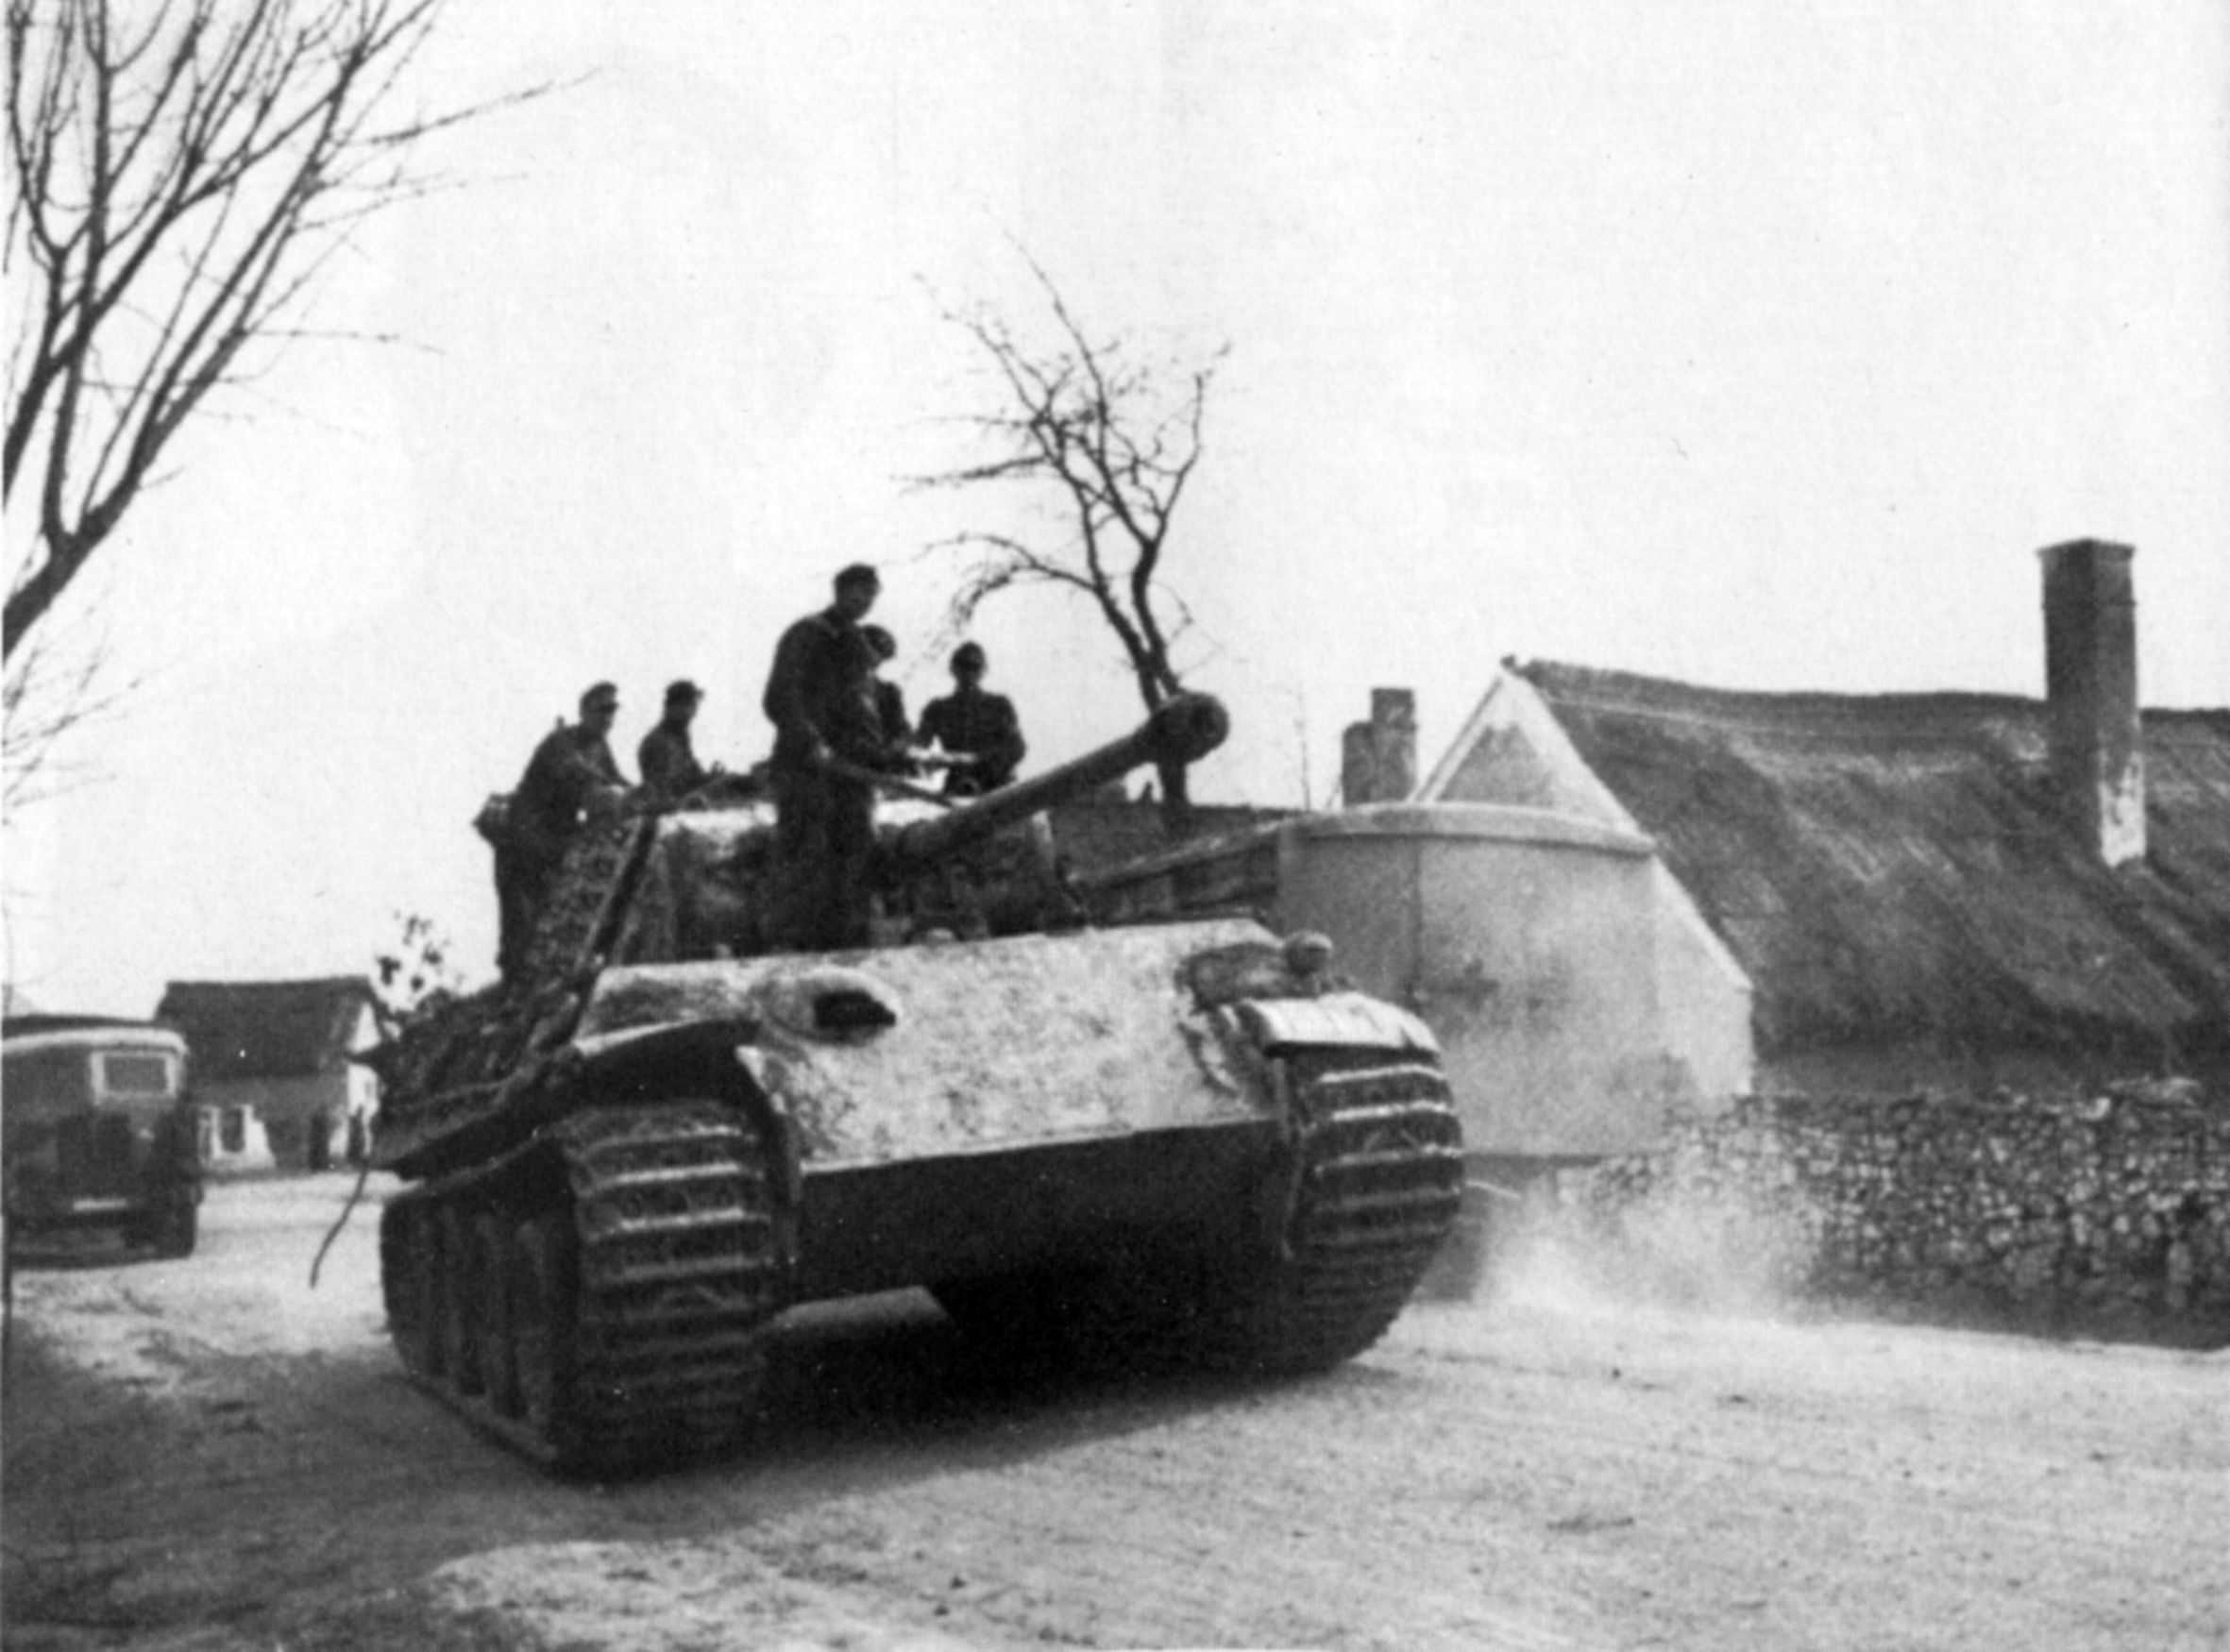 A Panther medium tank of the 12th SS Hitler Youth Panzer Division rolls forward in Hungary. The sloped armor of the Panther helped ward off enemy shells.